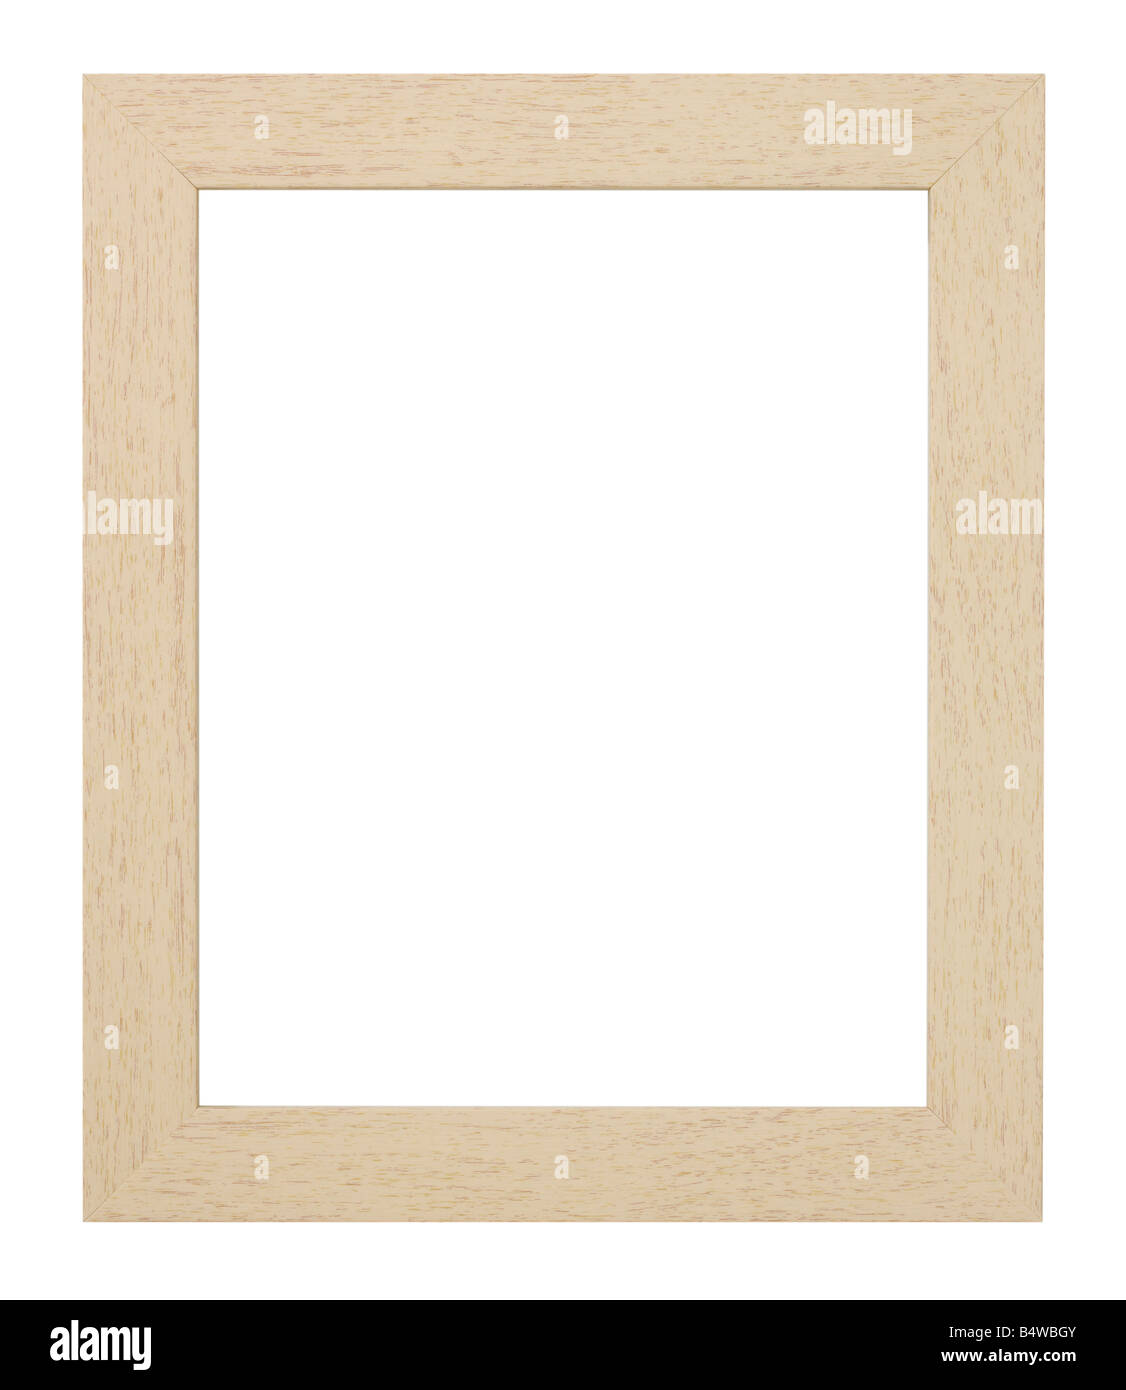 PALE WOOD PICTURE FRAME Stock Photo